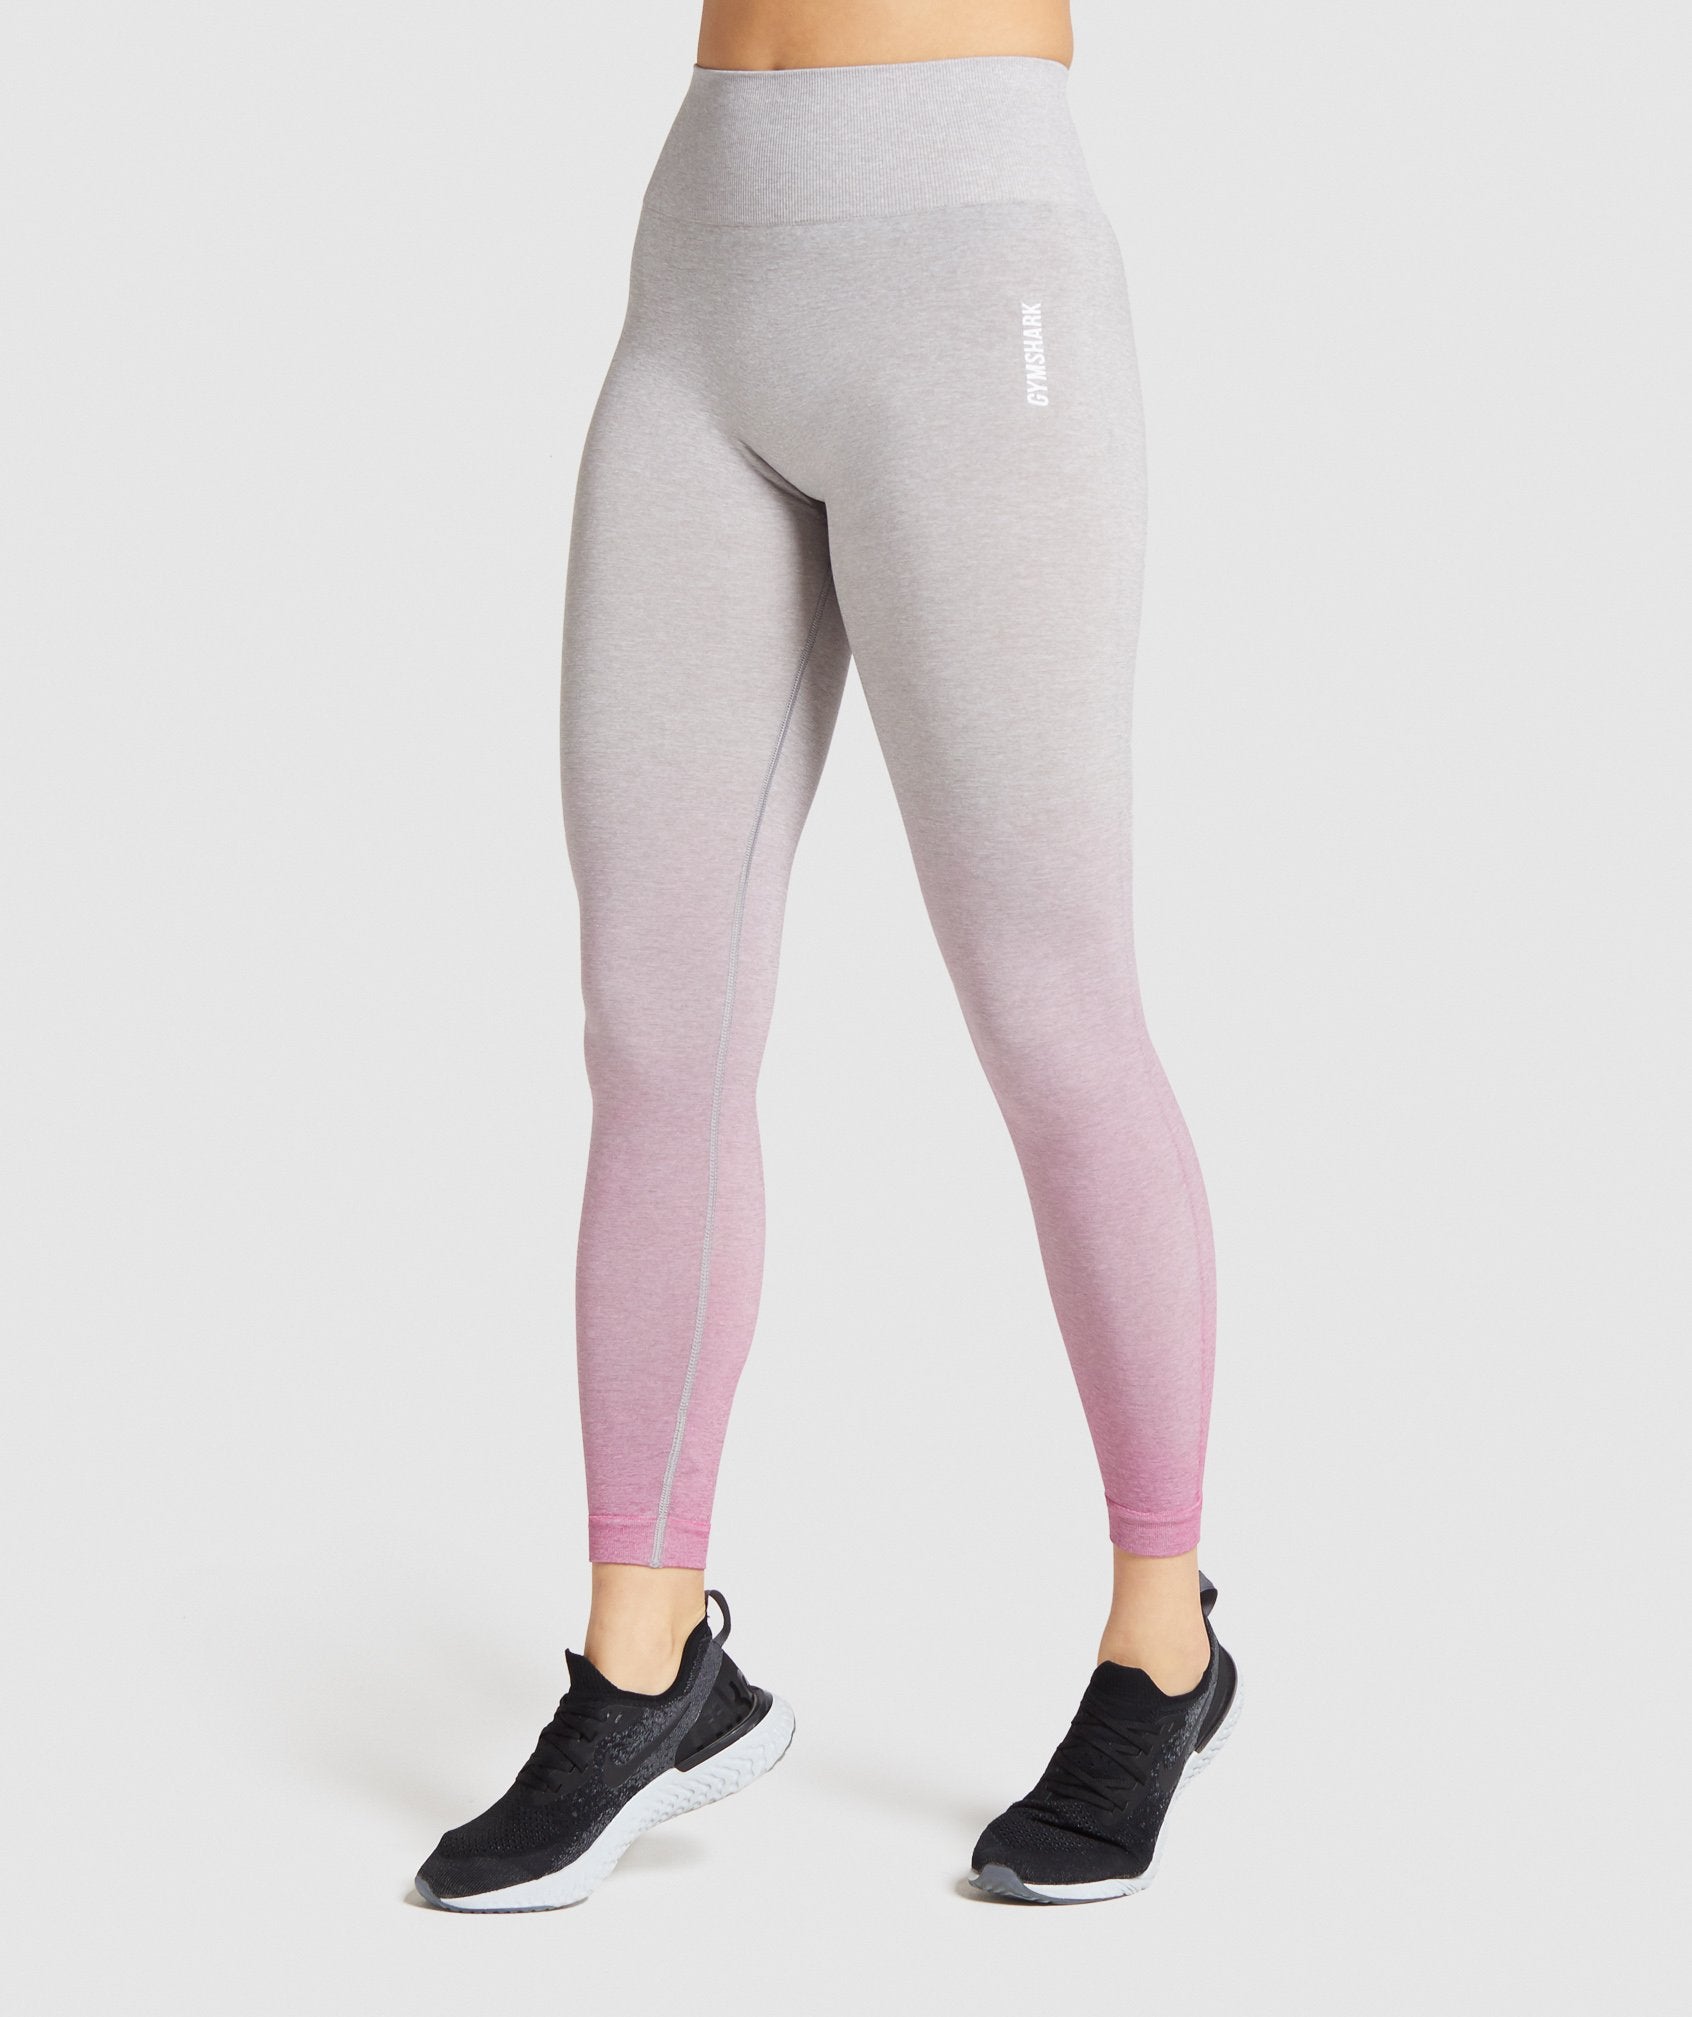 Gymshark Pink Ombre Seamless Leggings - $50 - From MiYahh